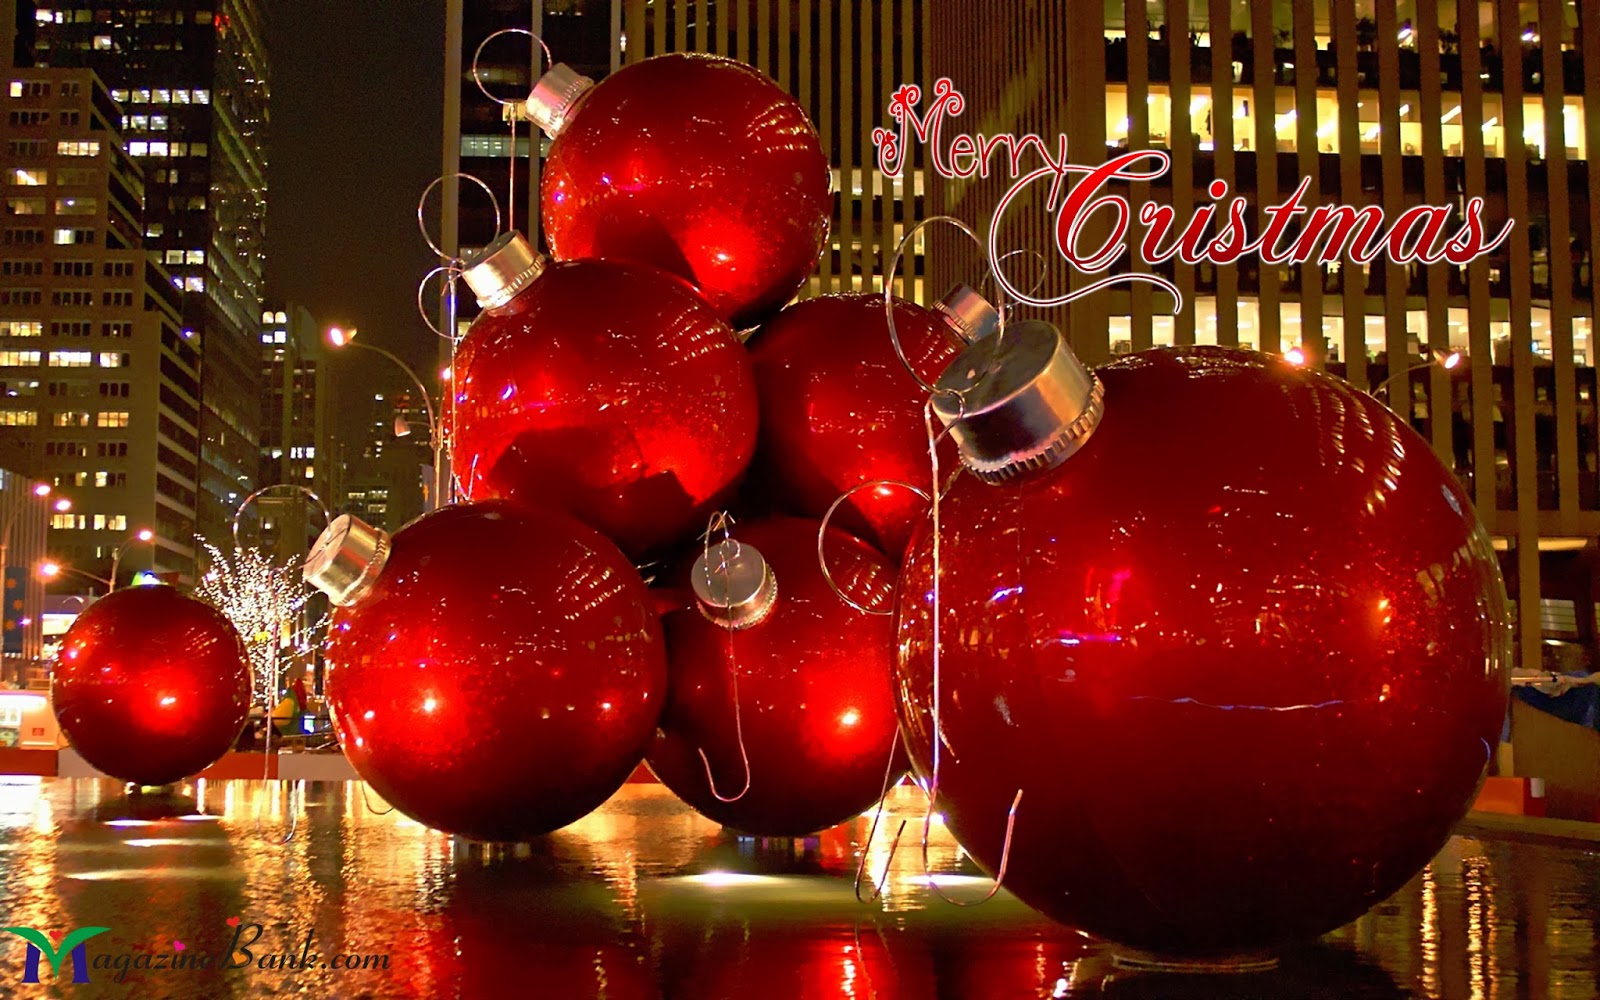 Merry Christmas Holiday Greetings Image And HD Wallpaper 1080p Sms